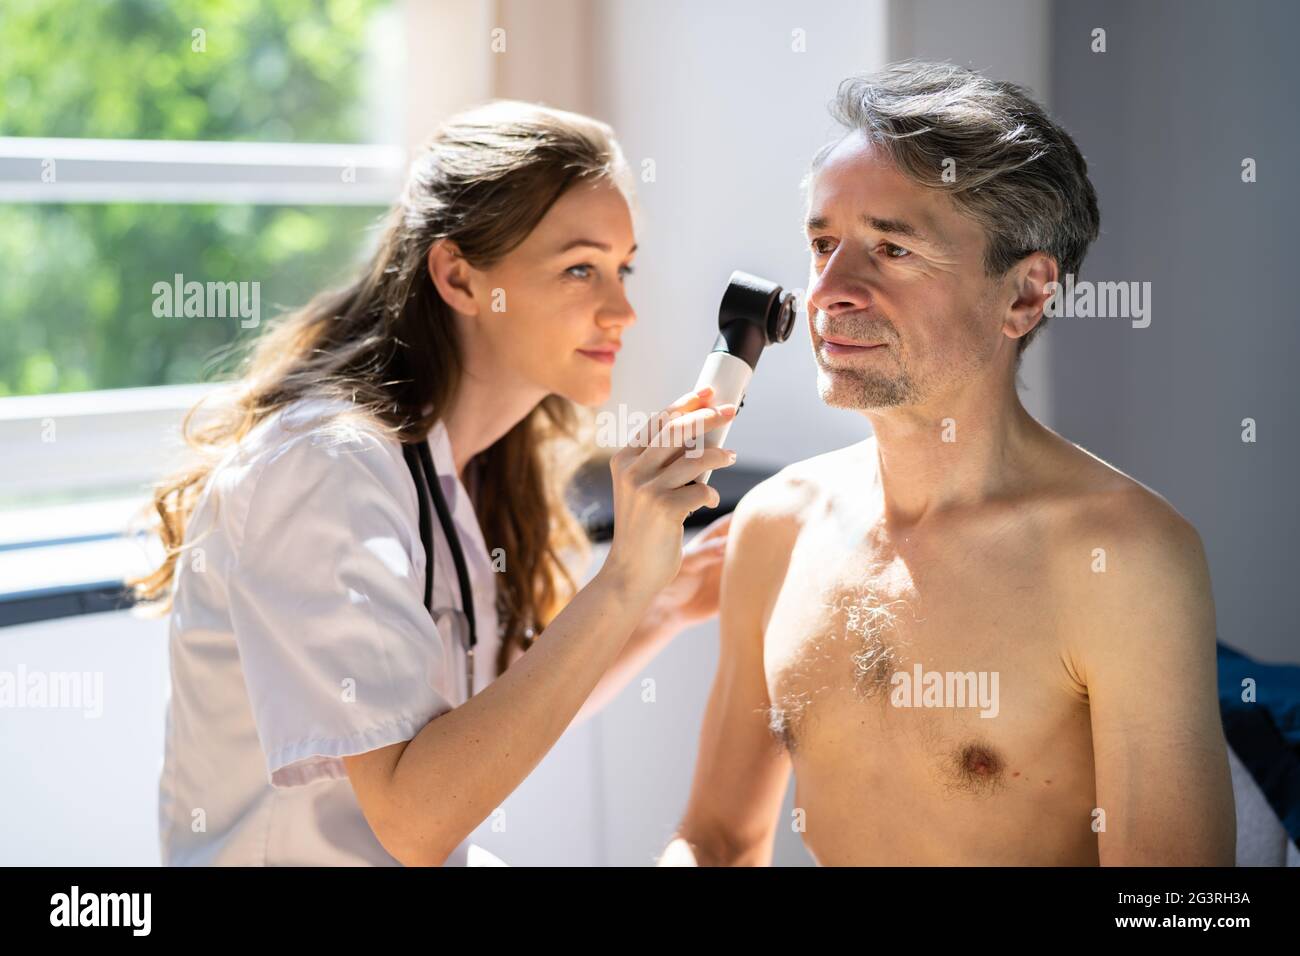 Dermatologist Checking Skin Allergy And Pigment Problems Stock Photo